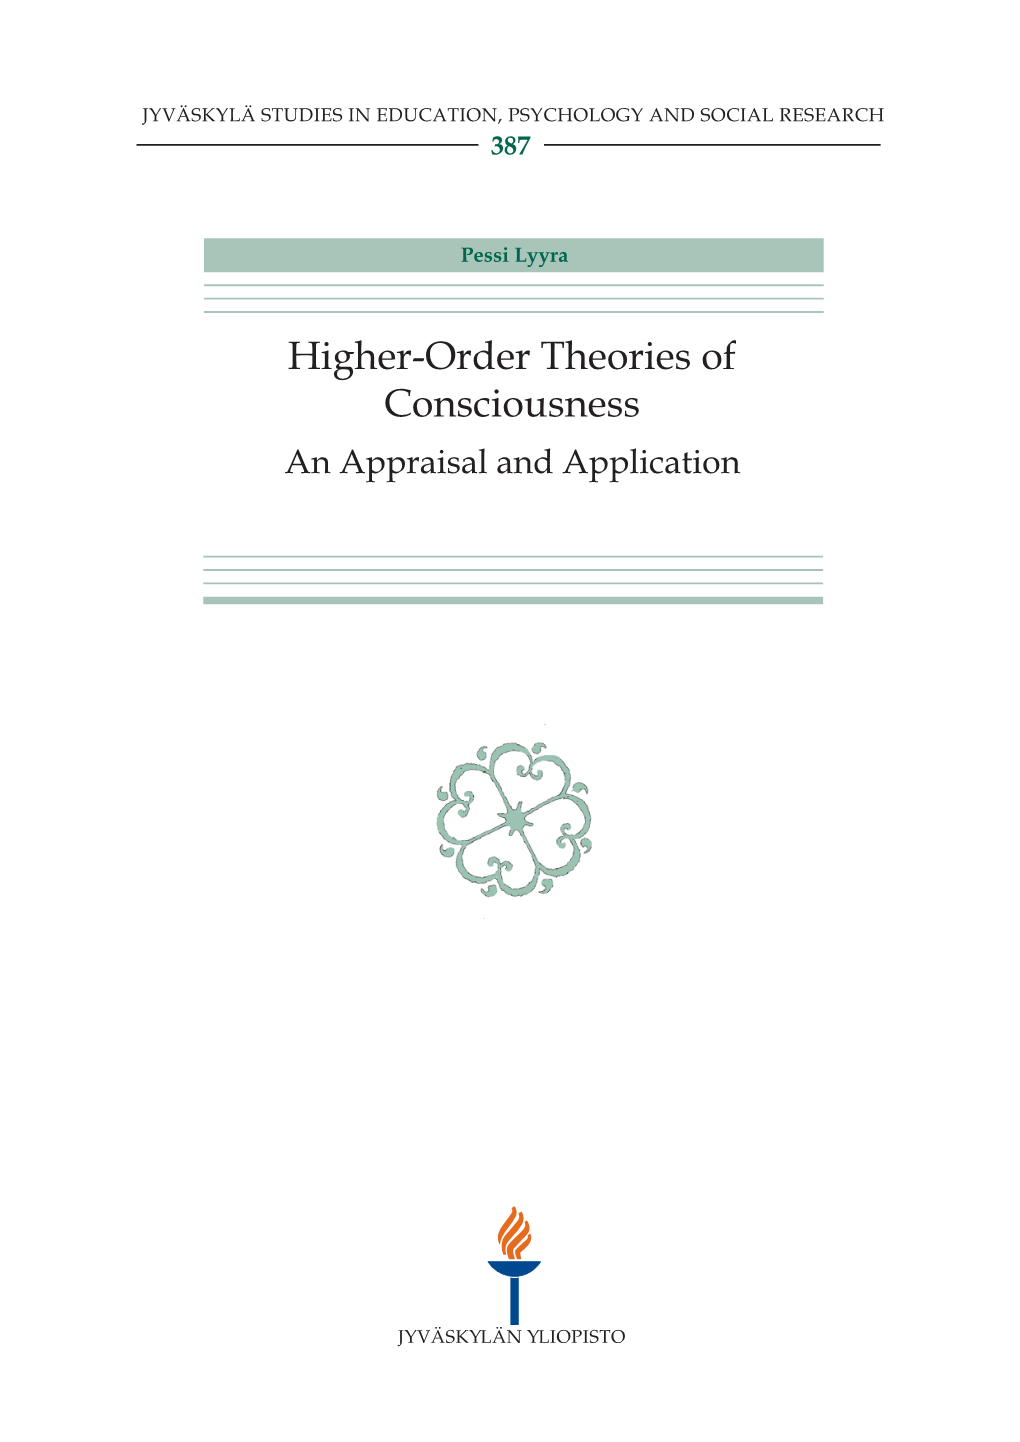 Higher-Order Theories of Consciousness. an Appraisal And